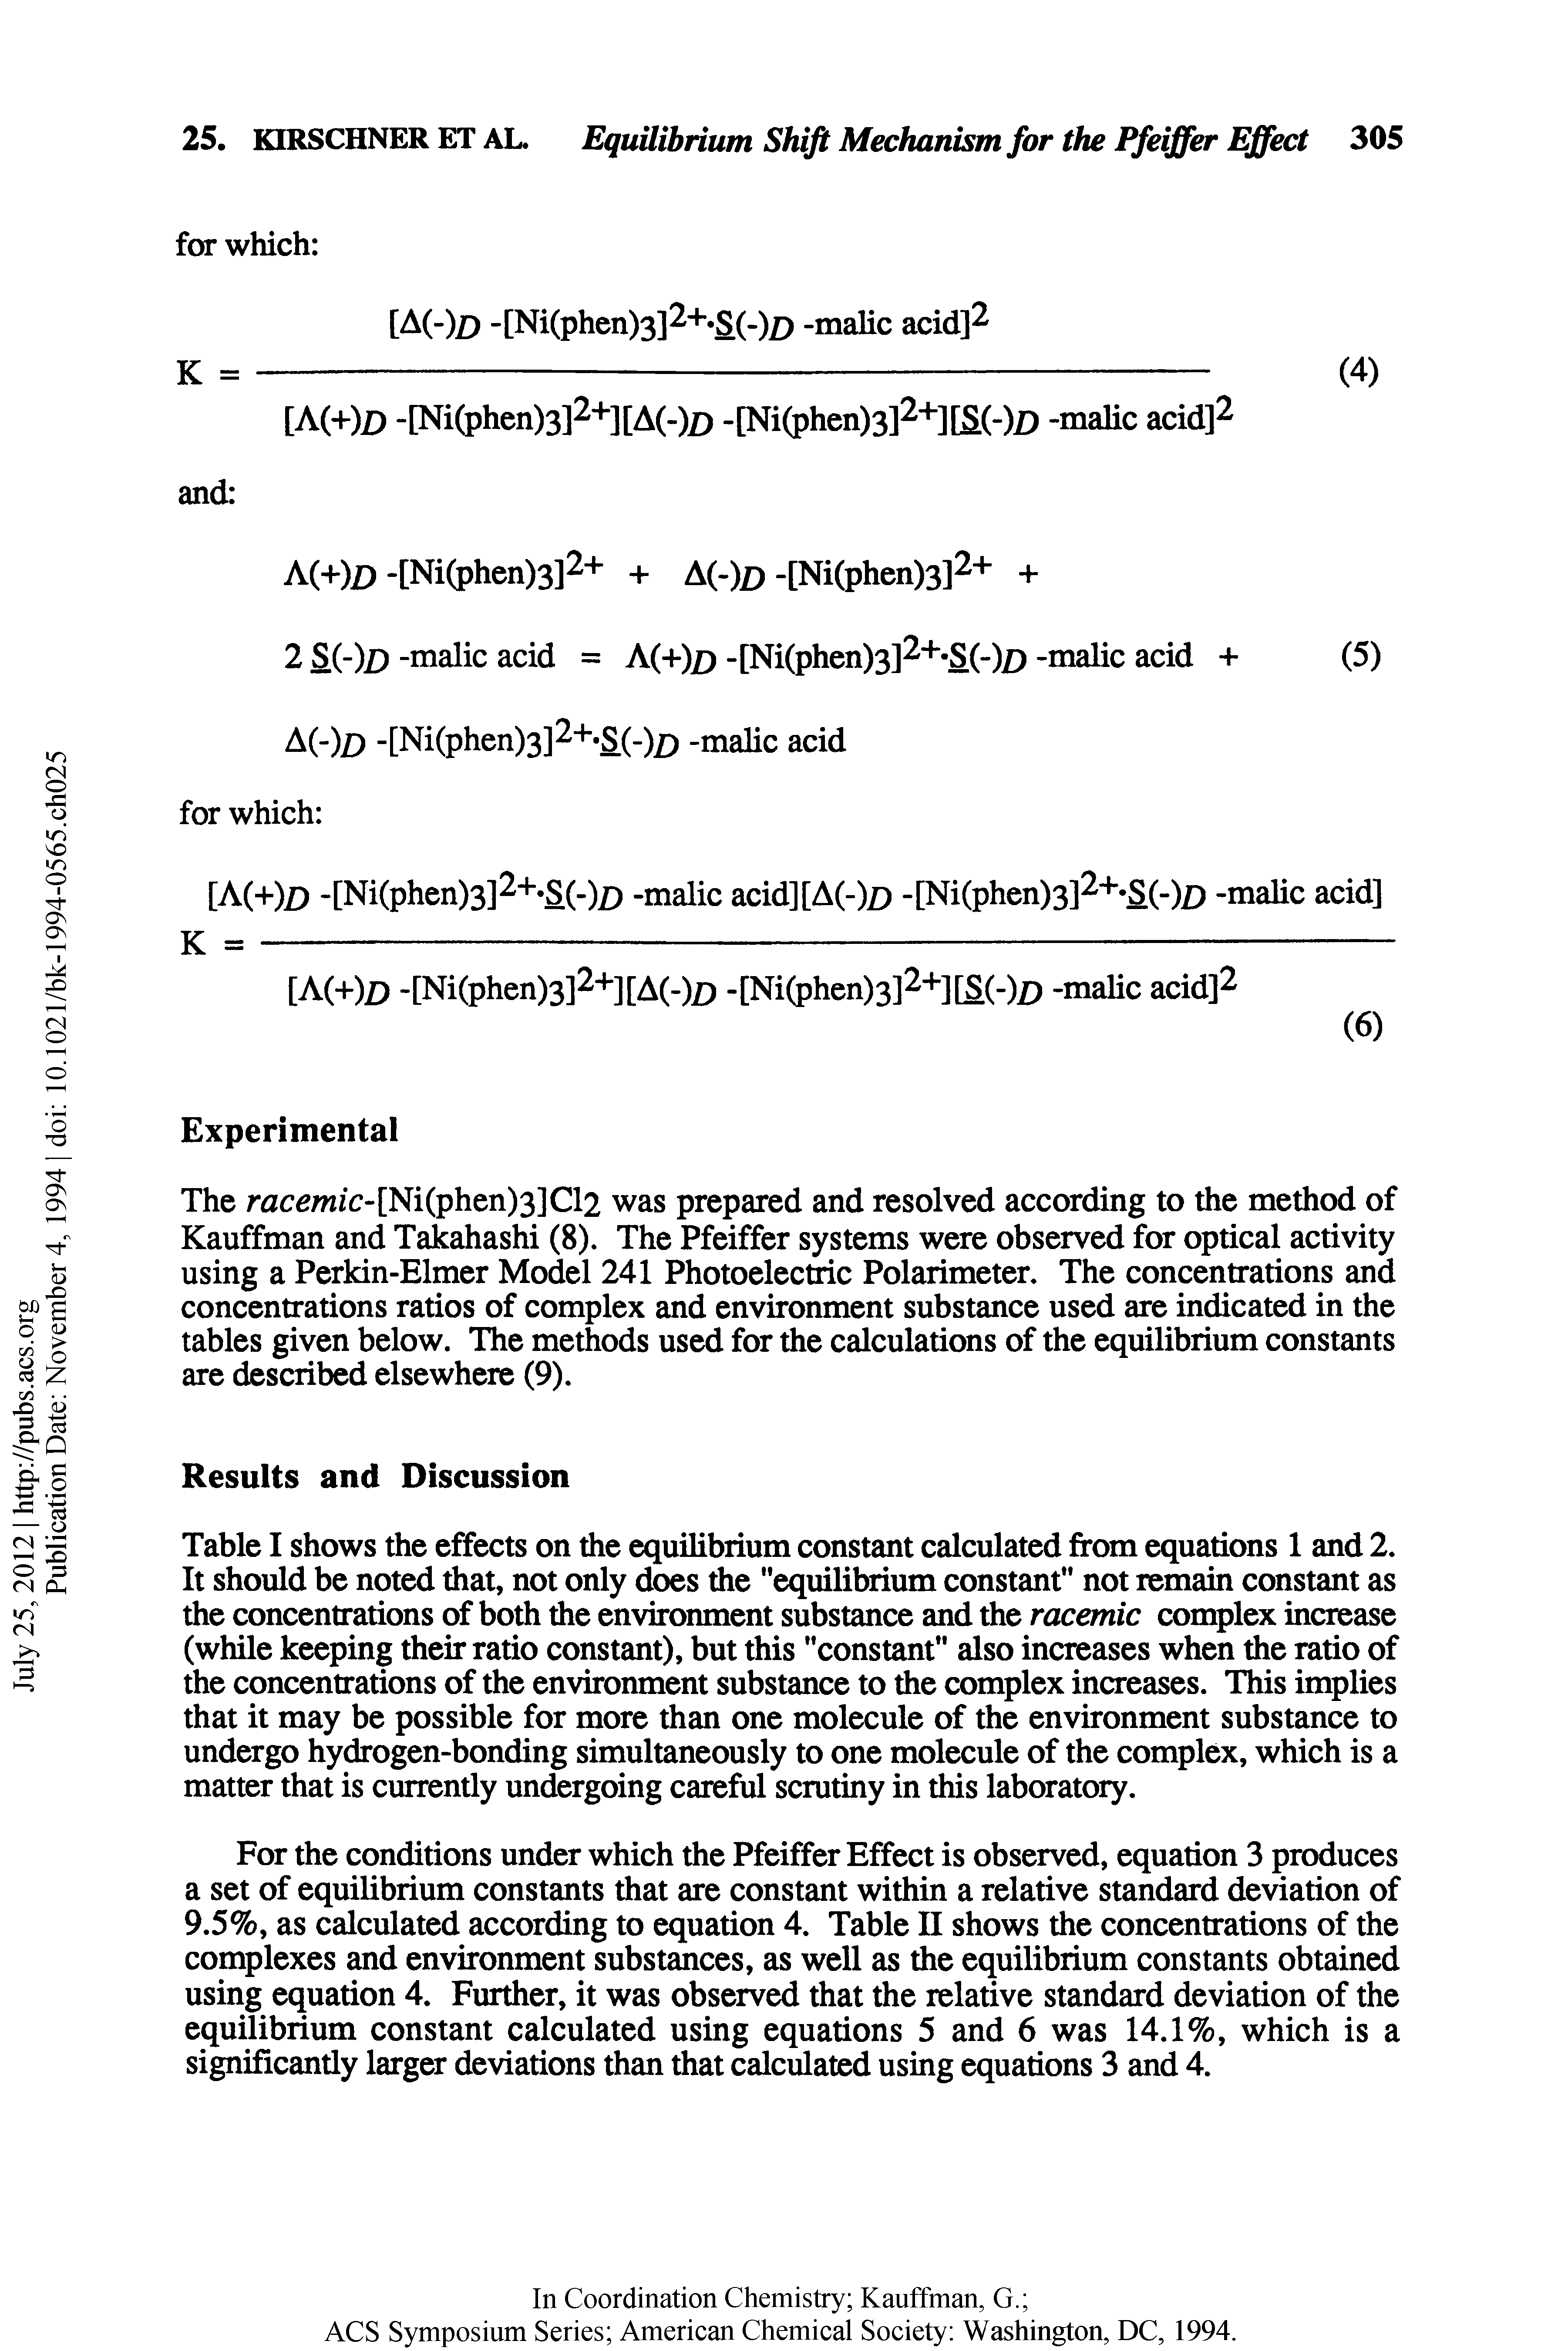 Table I shows the effects on the equilibrium constant calculated from equations 1 and 2. It should be noted that, not only does die "equilibrium constant" not remain constant as the concentrations of both the environment substance and the racemic complex increase (while keeping their ratio constant), but this "constant" also increases when the ratio of the concentrations of the environment substance to the complex increases. This implies that it may be possible for more than one molecule of the environment substance to undergo hydrogen-bonding simultaneously to one molecule of the complex, which is a matter that is currently undergoing careful scrutiny in this laboratory.